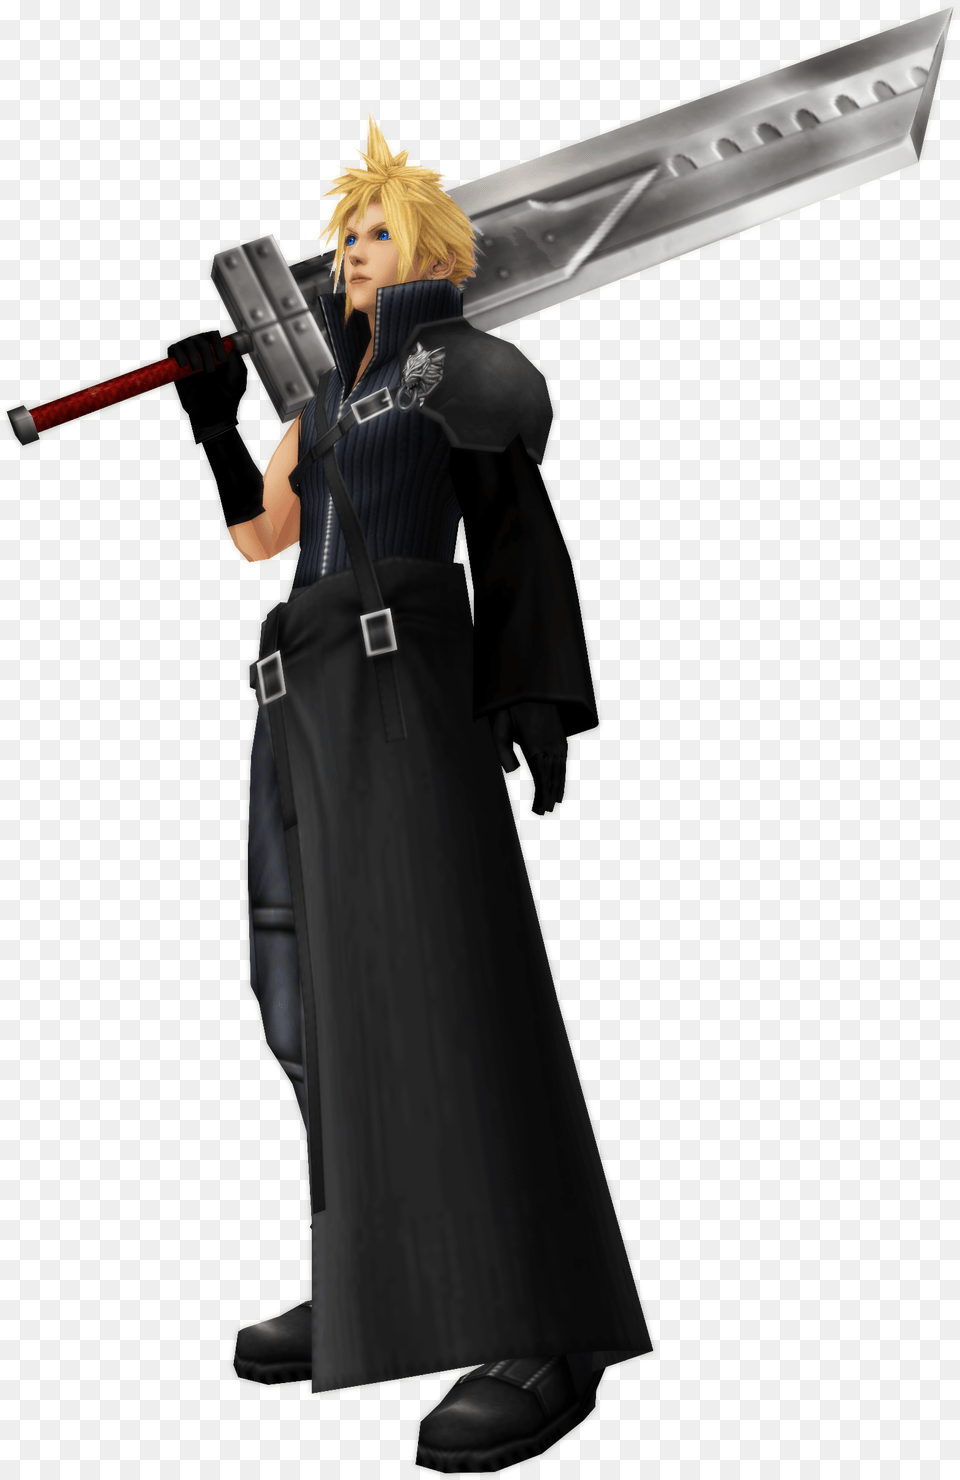 Cloud Strife Download Cloud Strife Mmd Model, Clothing, Costume, Weapon, Sword Free Png